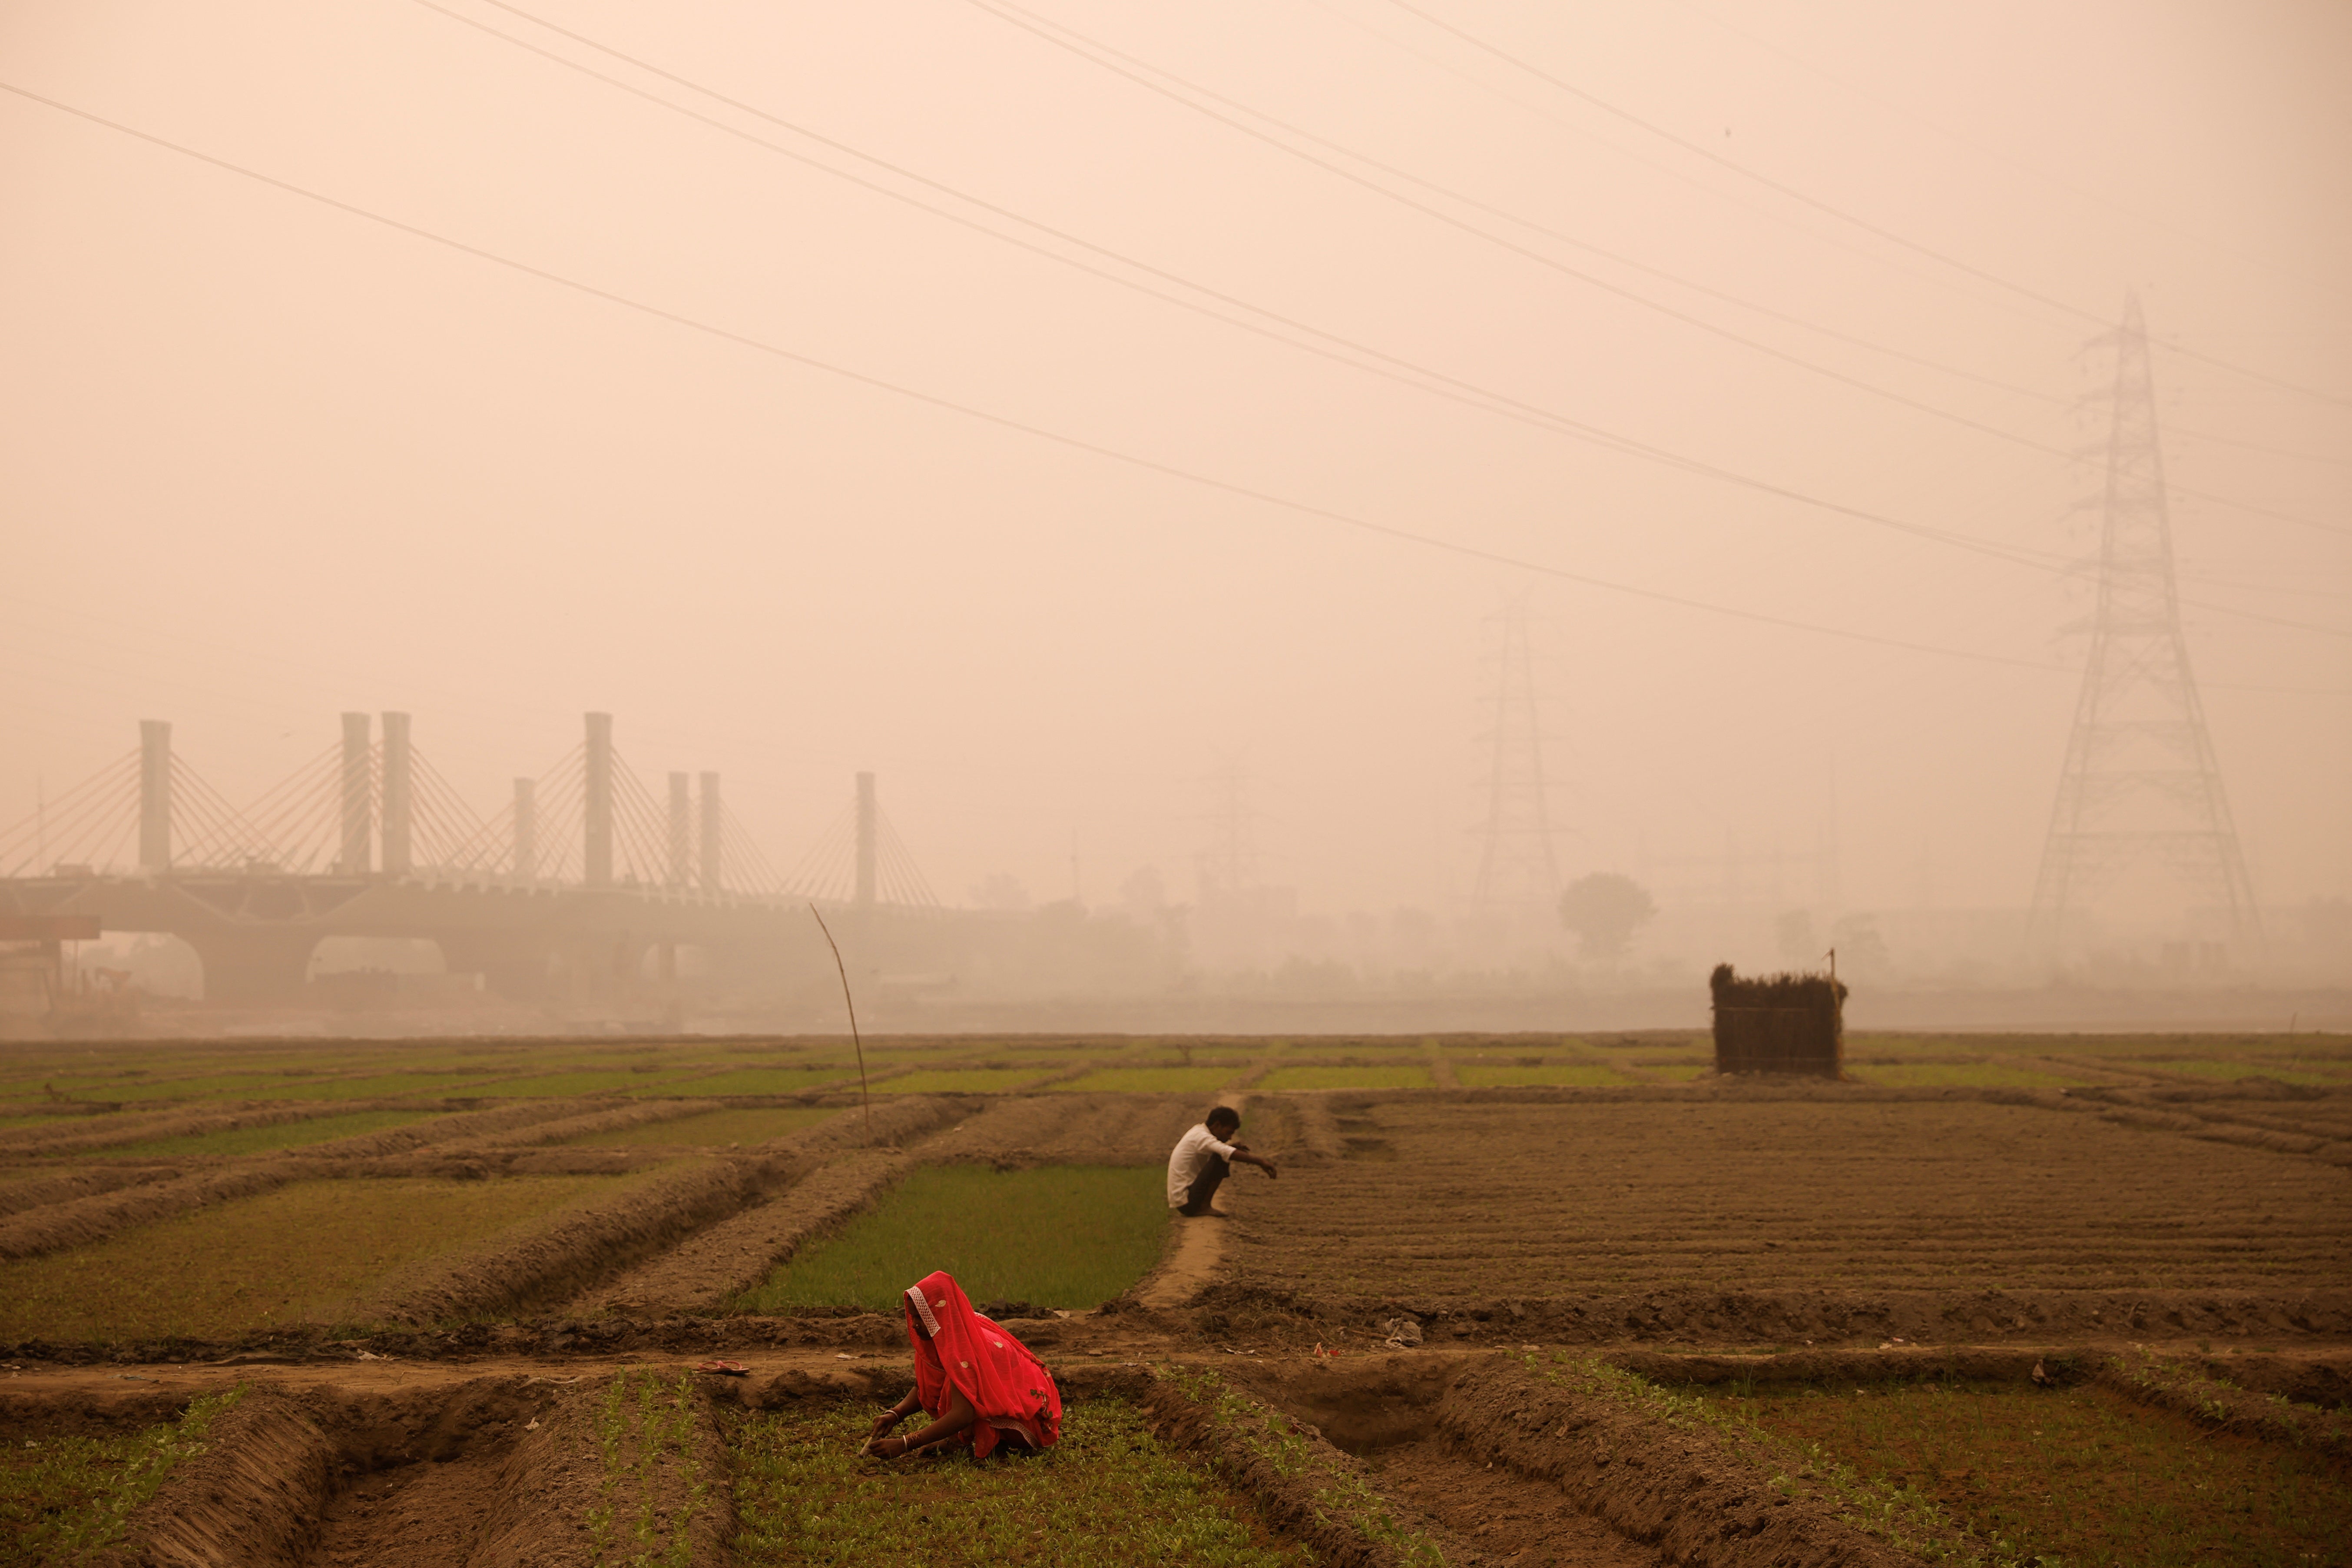 Farmers work amid smog in a field on the banks of the Yamuna river in New Delhi, India